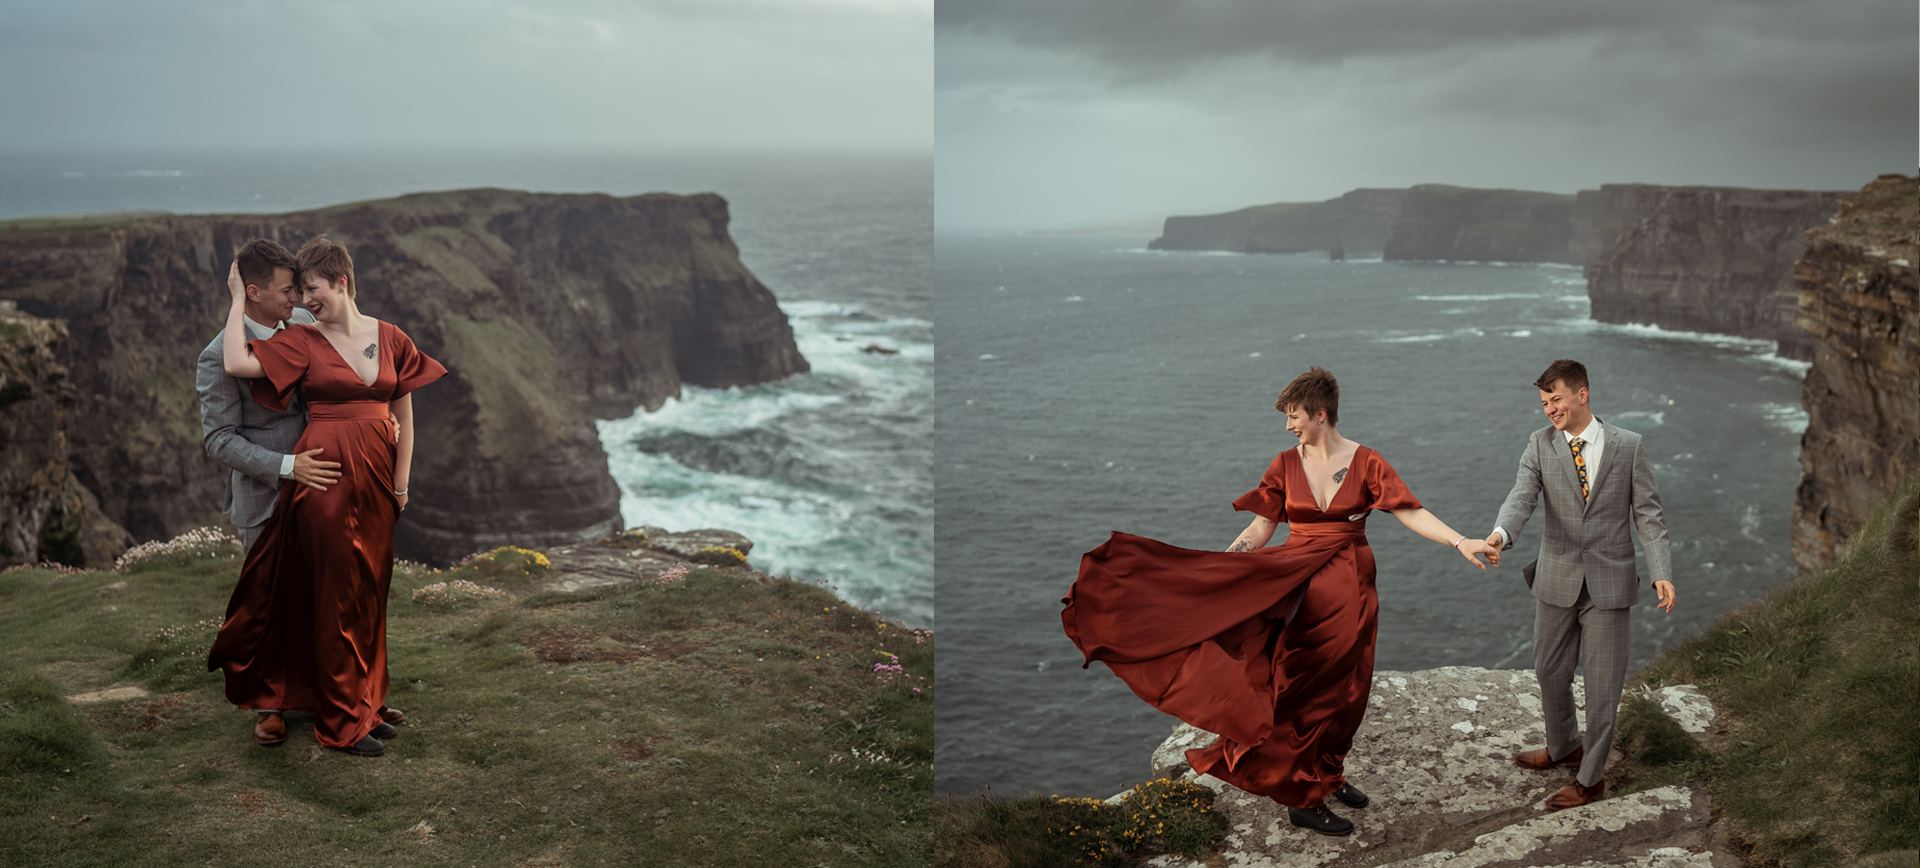 Adventure Session in Ireland - Donegal Photoshoot